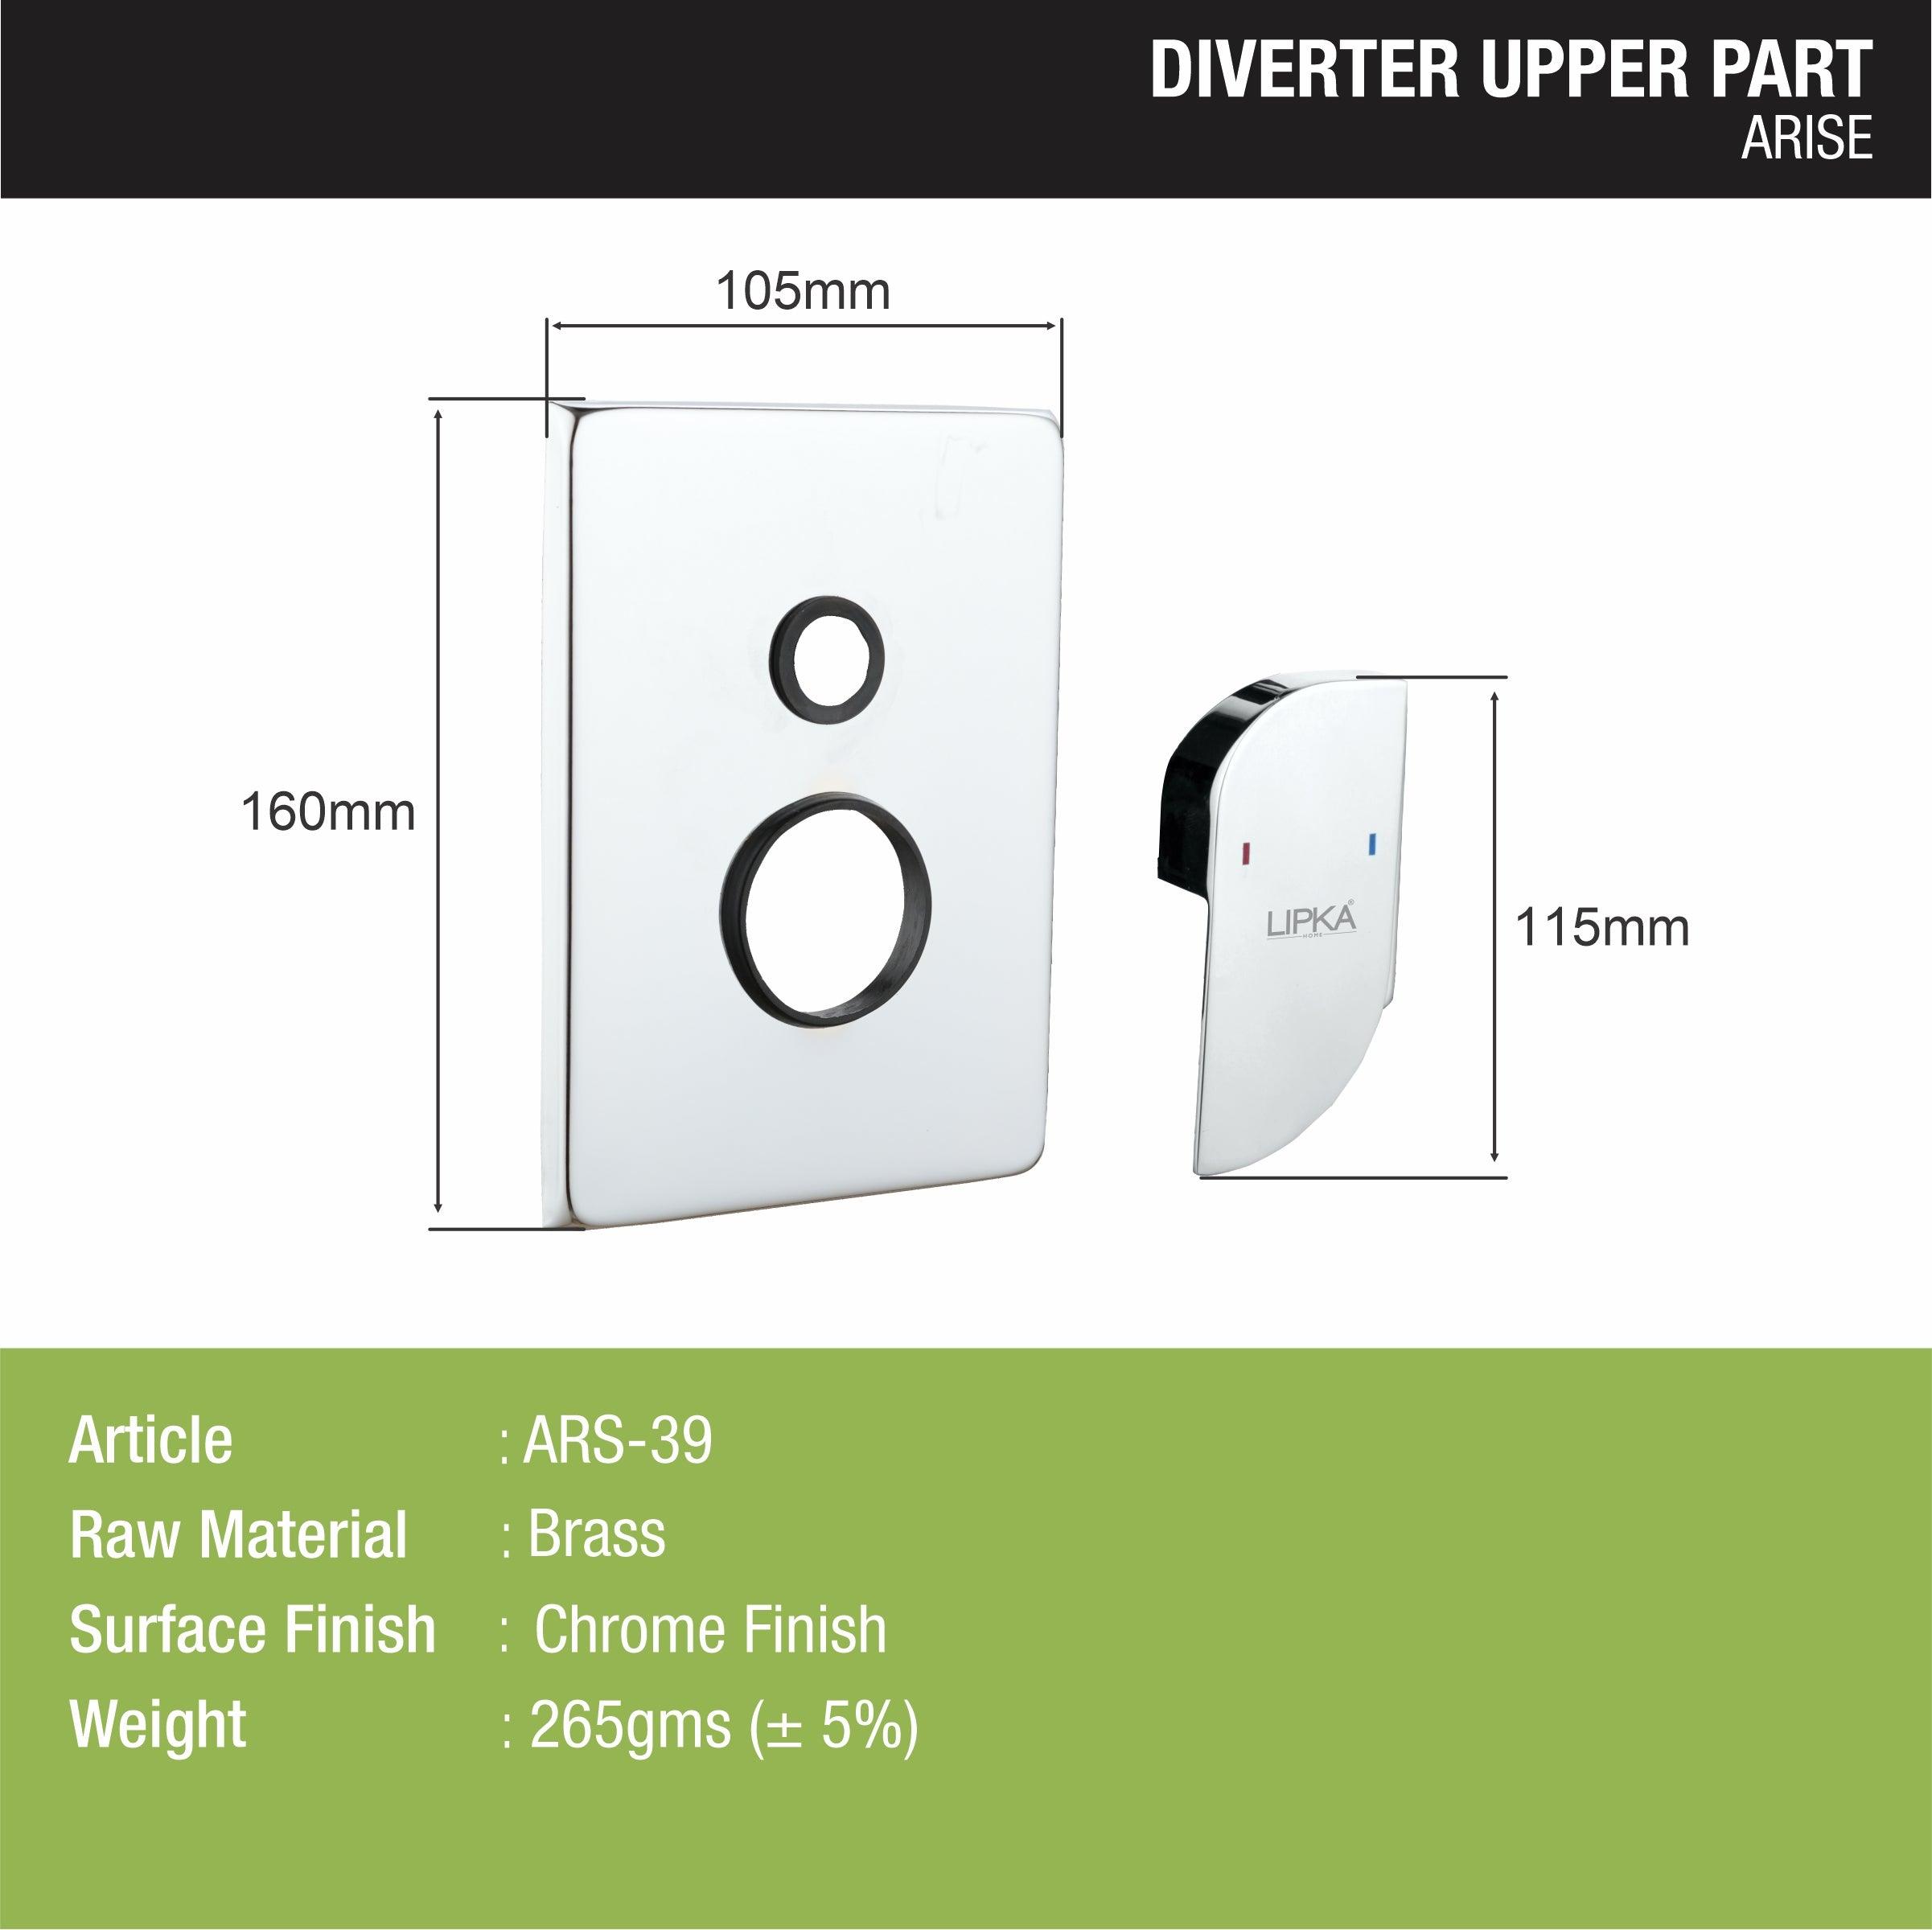 Arise Diverter Upper Part sizes and dimensions